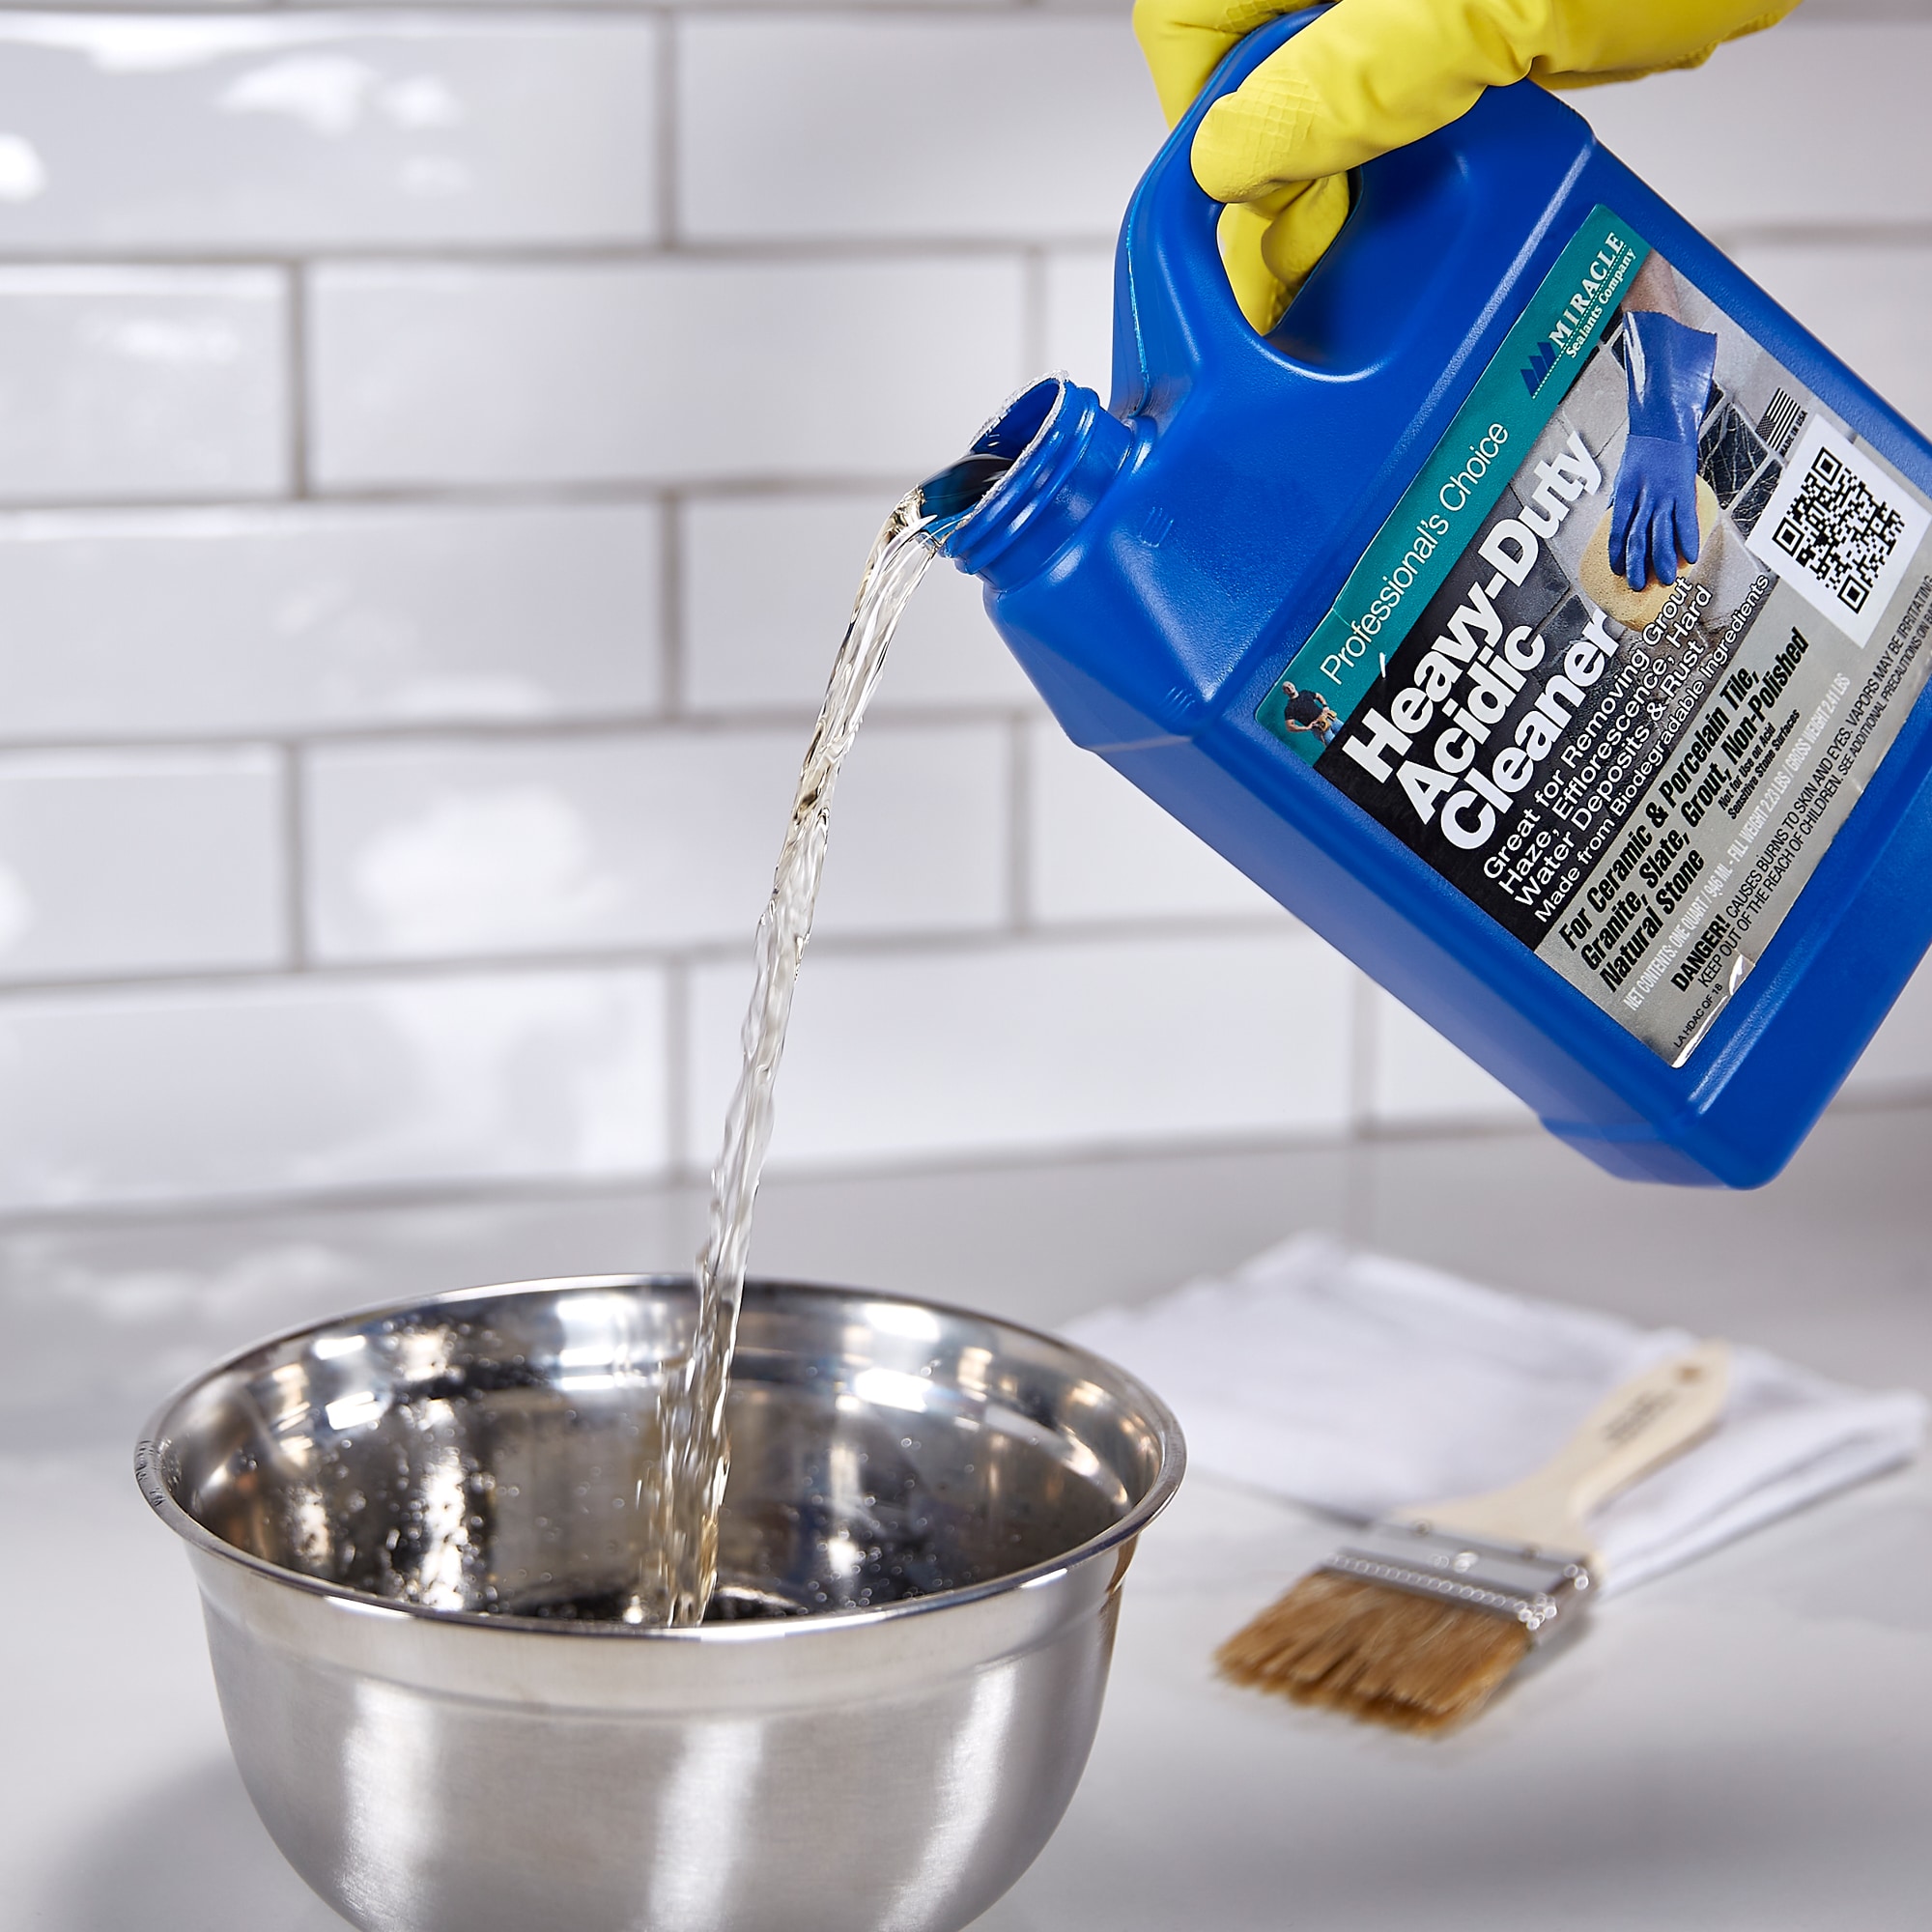 Quality Chemical Grout Glo/heavy-duty acid restroom tile, grout and fixture  cleaner/Removes rust, scale & calcium deposits / 4 Gallon case